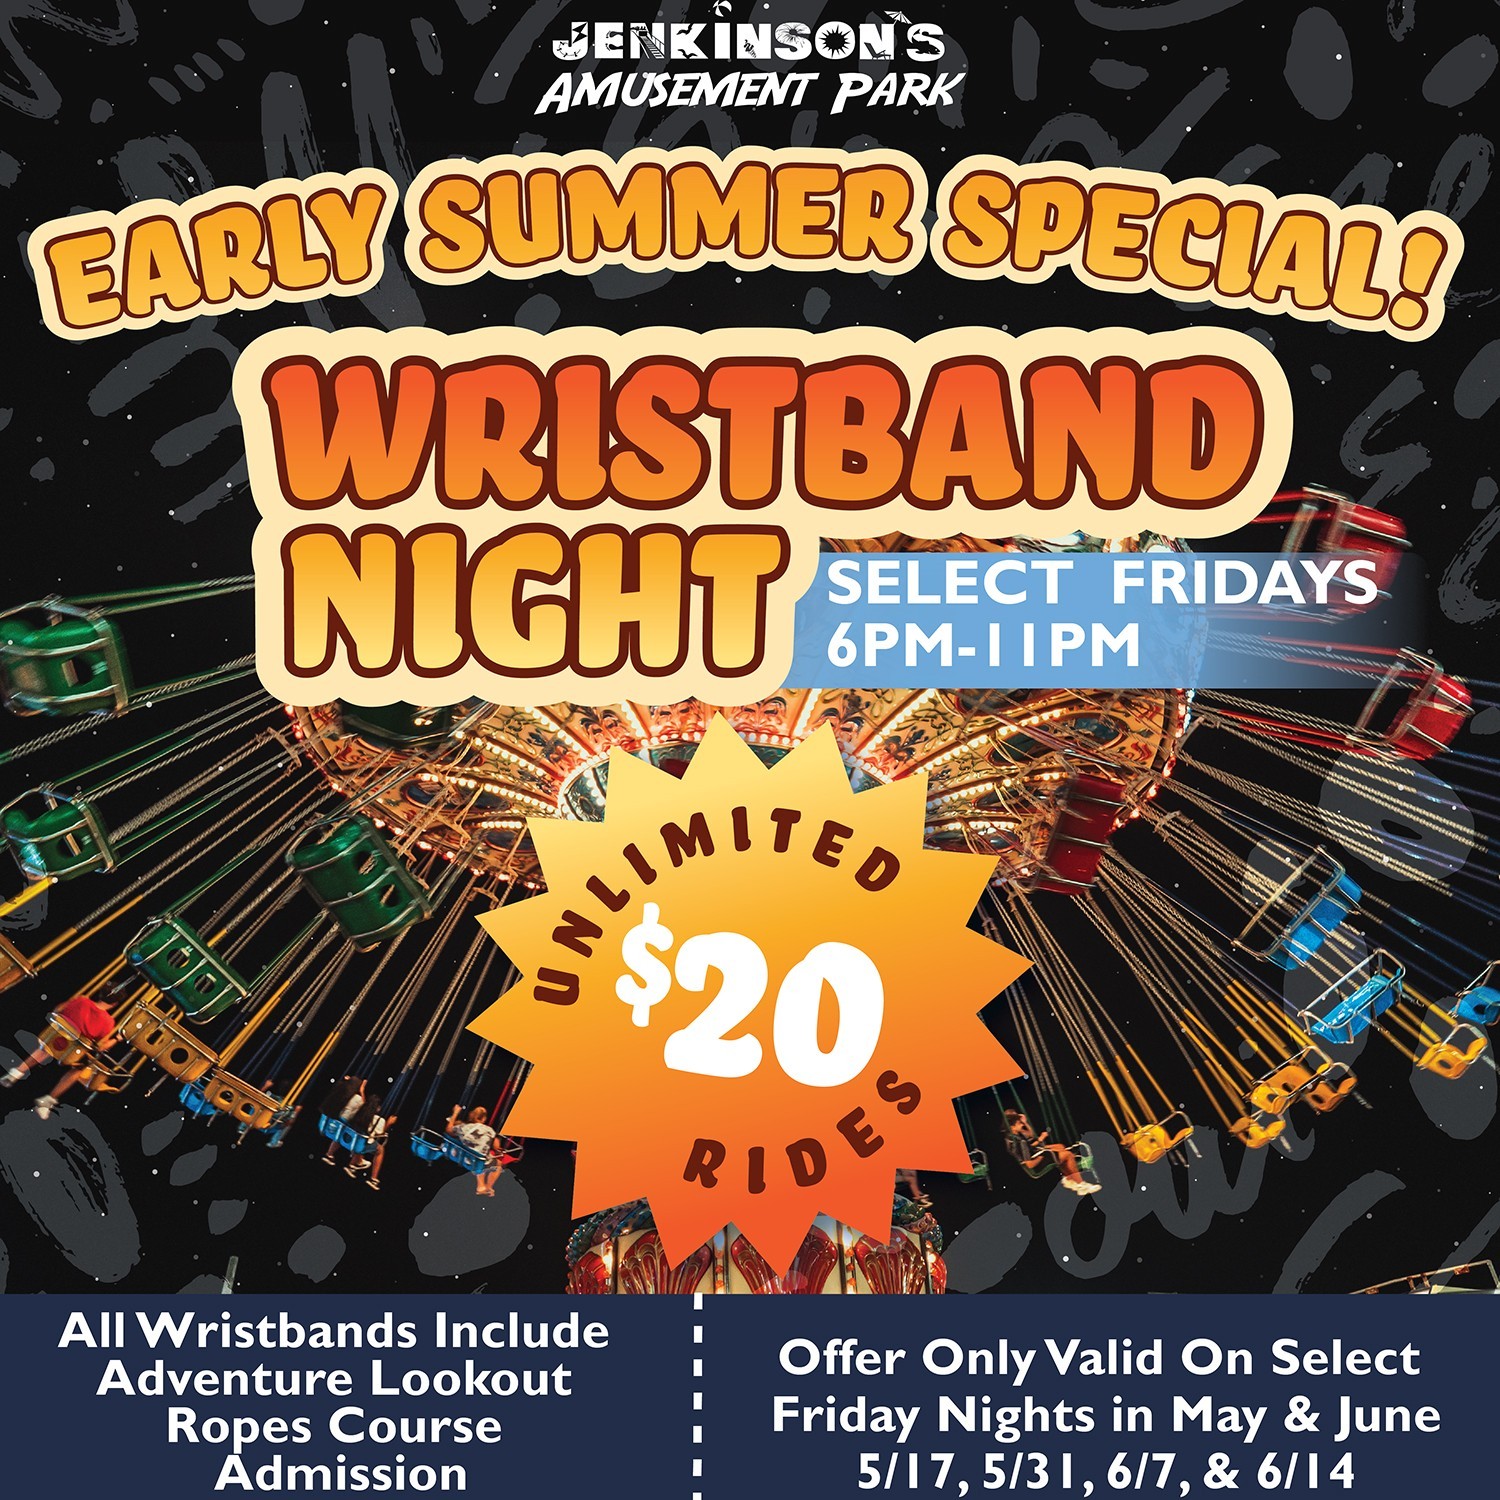 Flyer for early summer special wristband night: Enjoy discounted access to all rides and attractions.